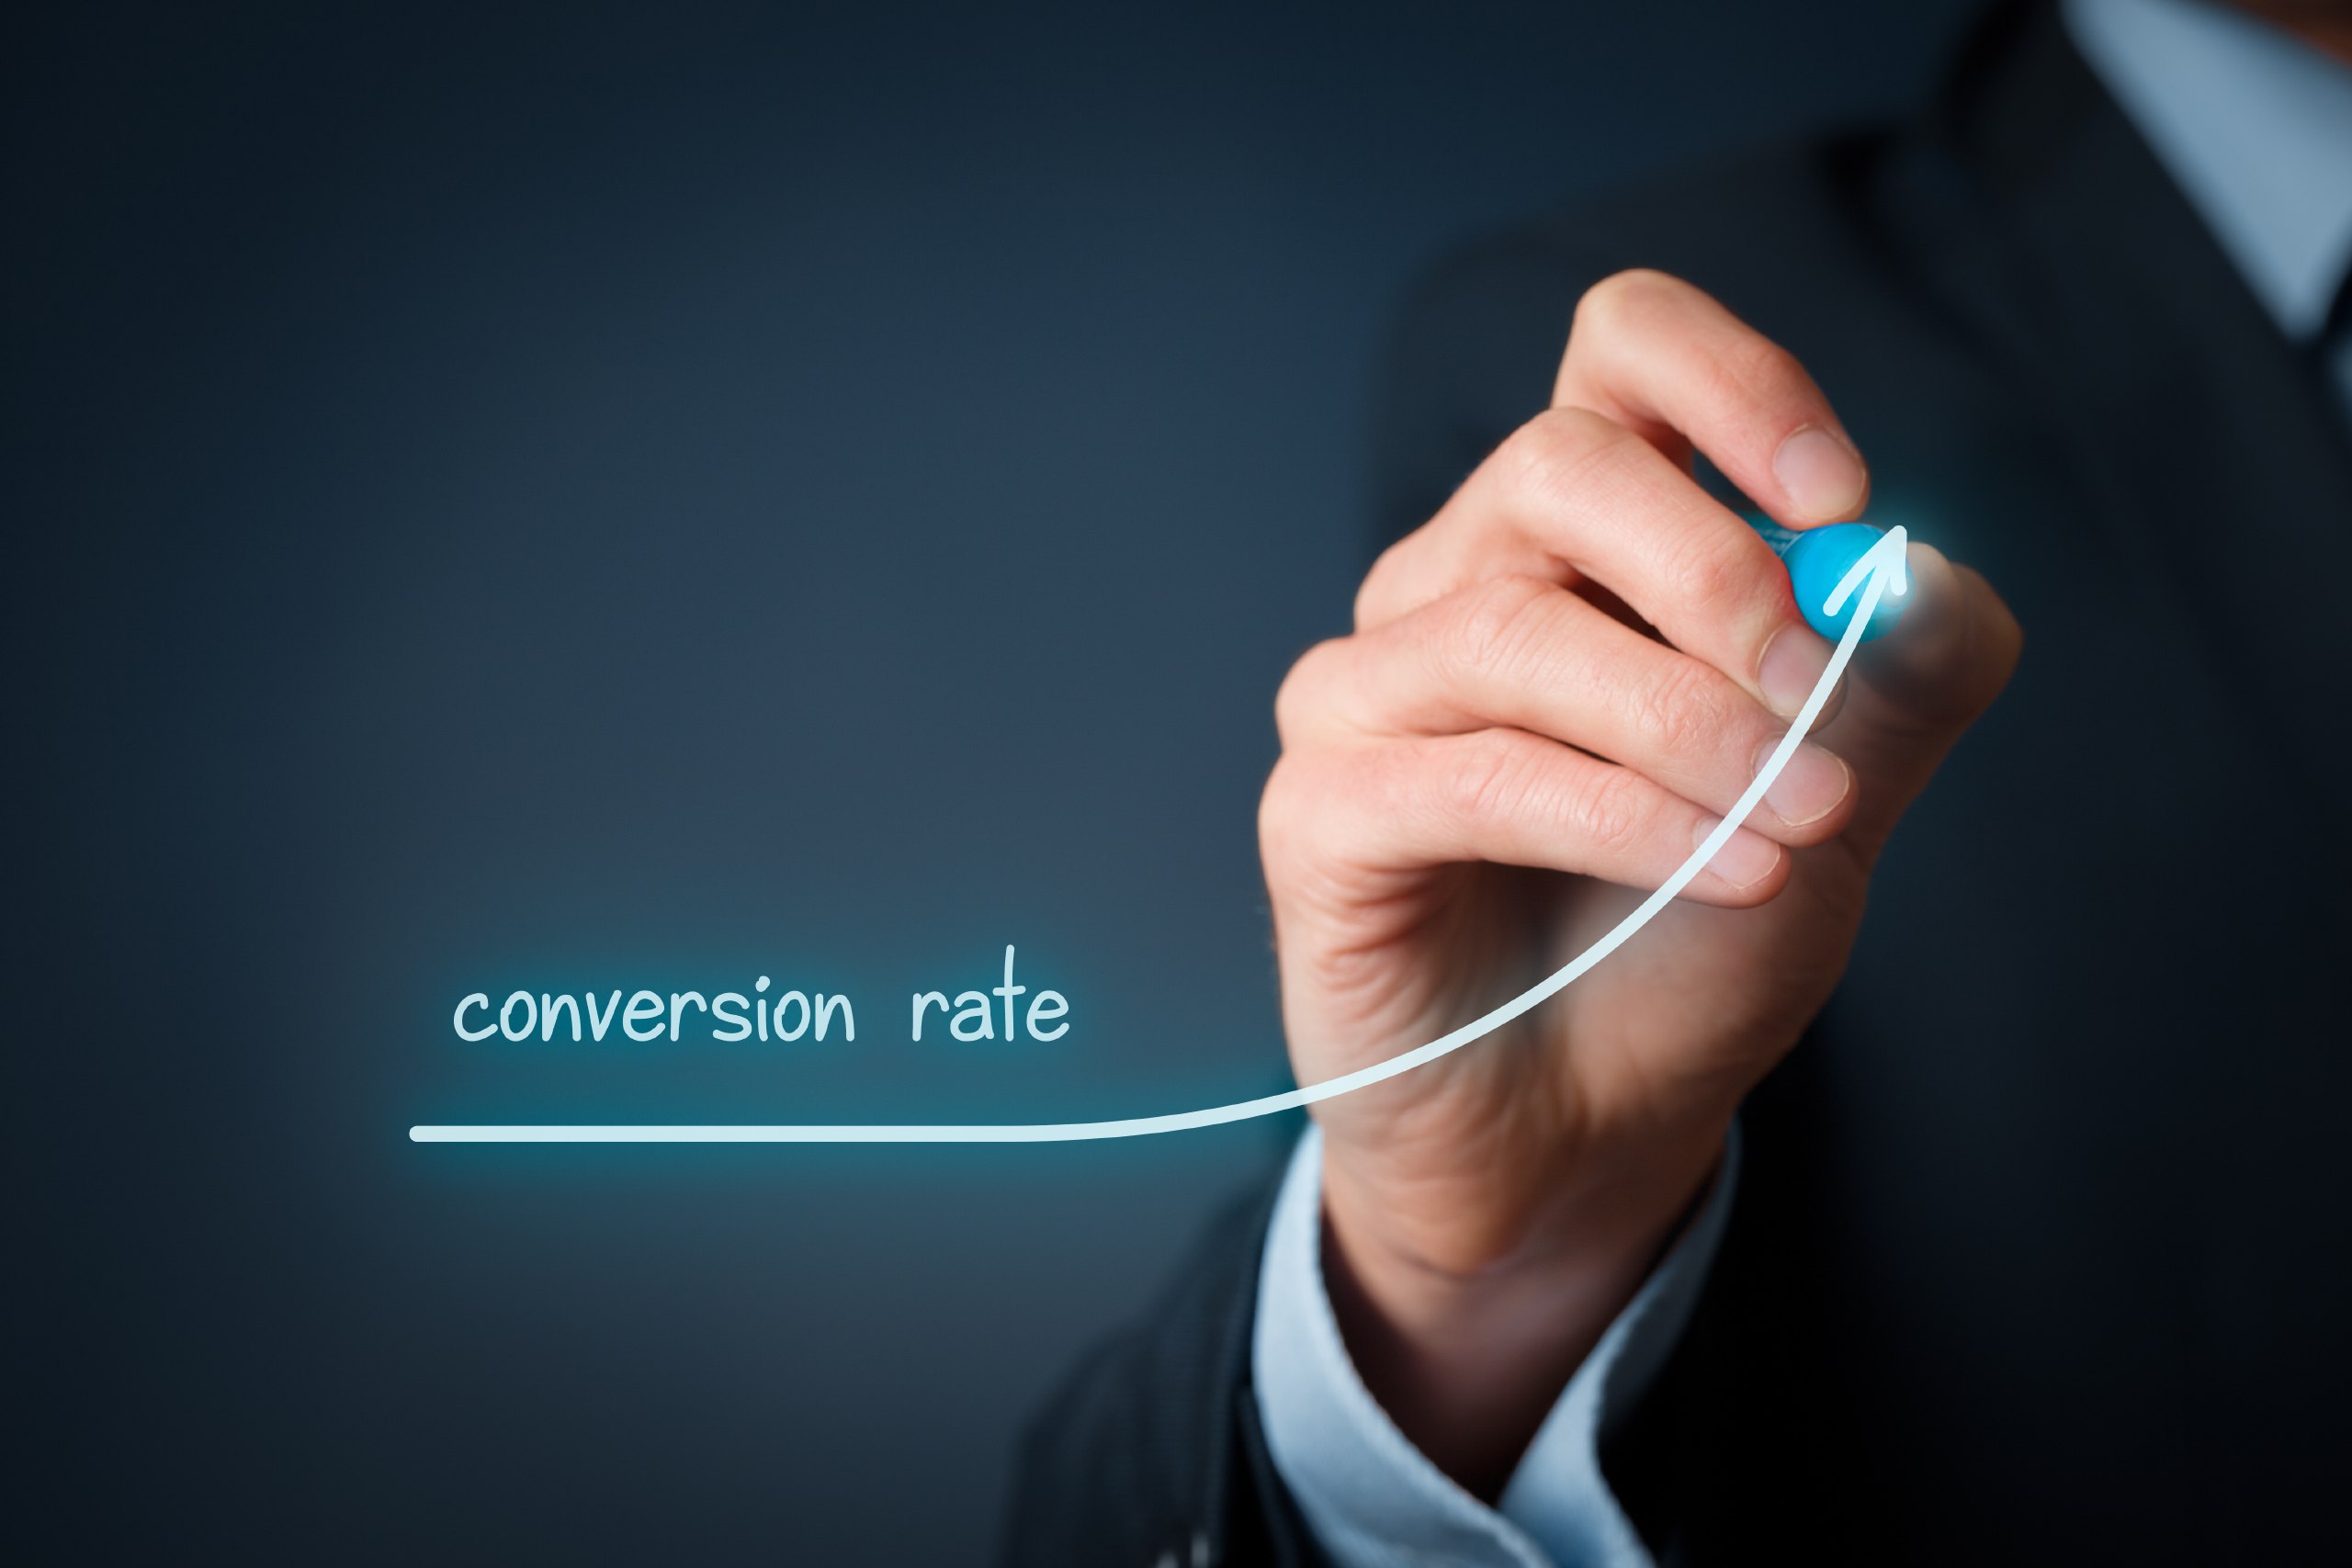 6 WAYS TO OPTIMISE CONVERSION RATE